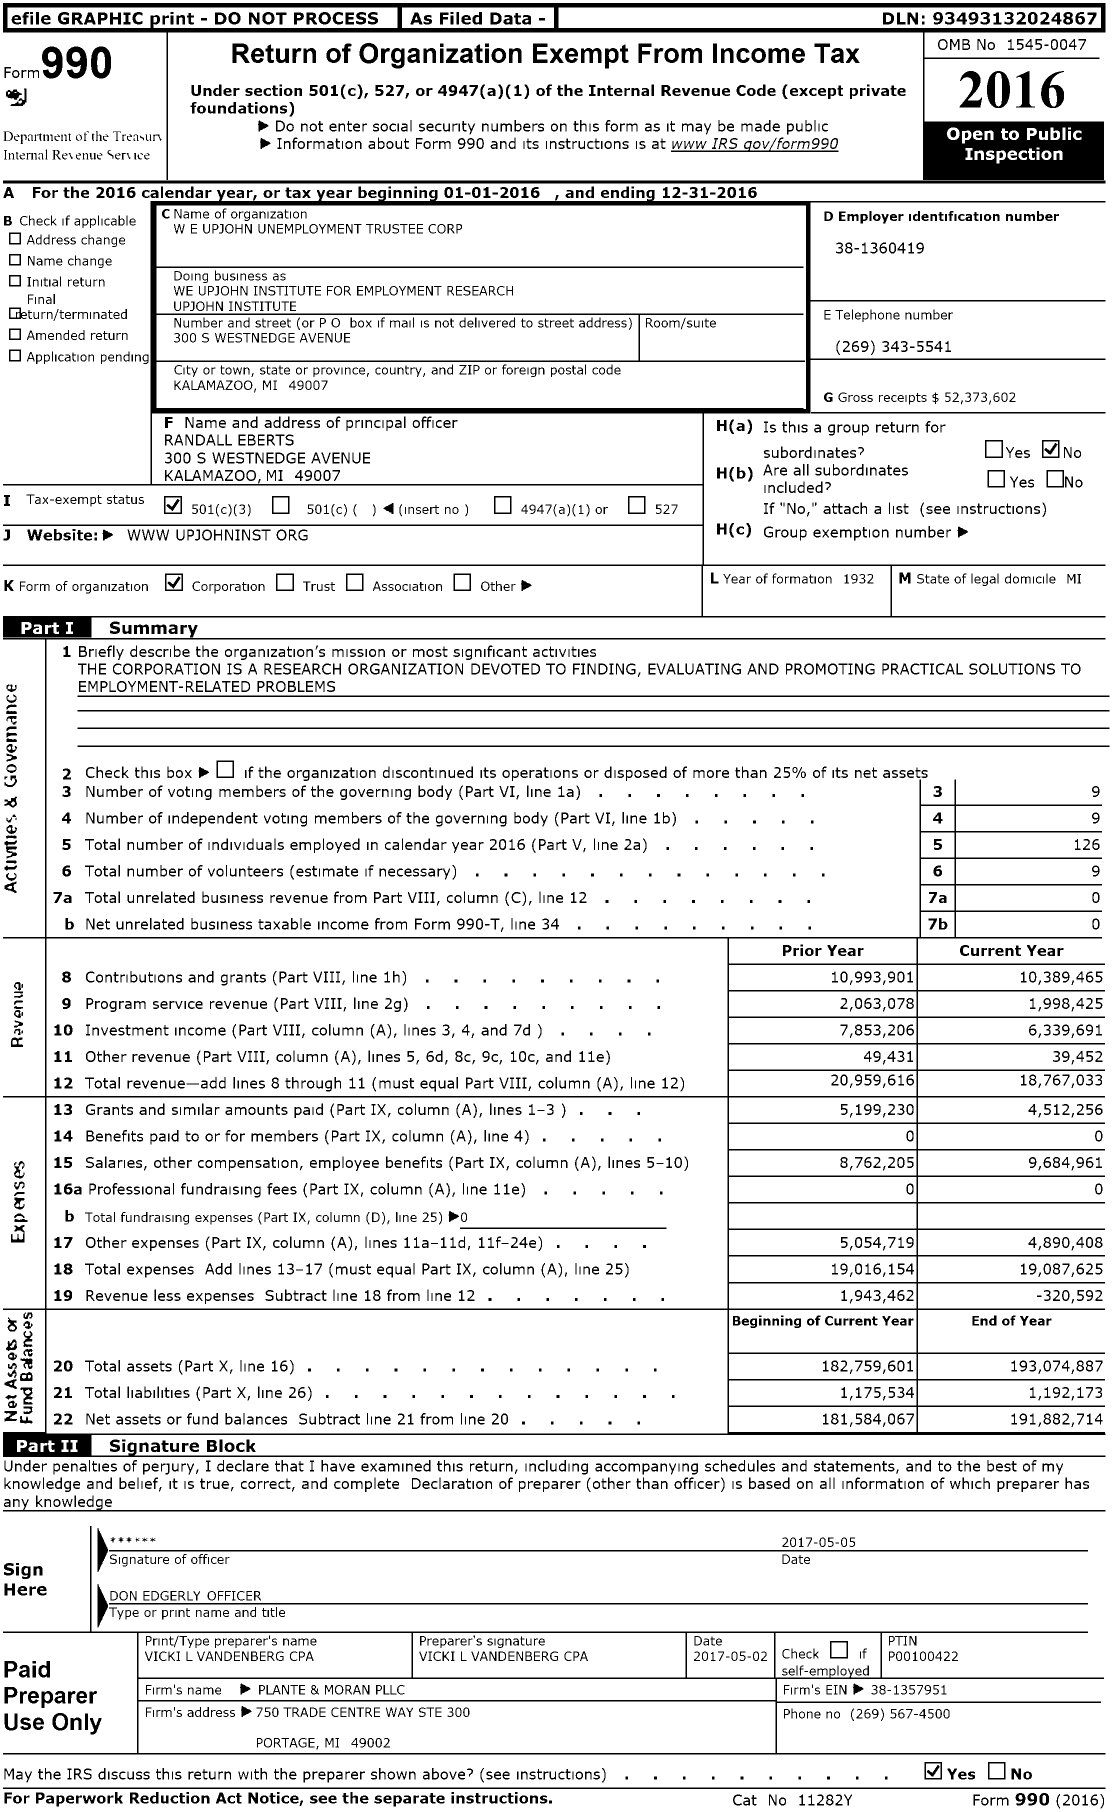 Image of first page of 2016 Form 990 for We Upjohn Institute for Employment Research Upjohn Institute Center for Regional Economic and Community Development